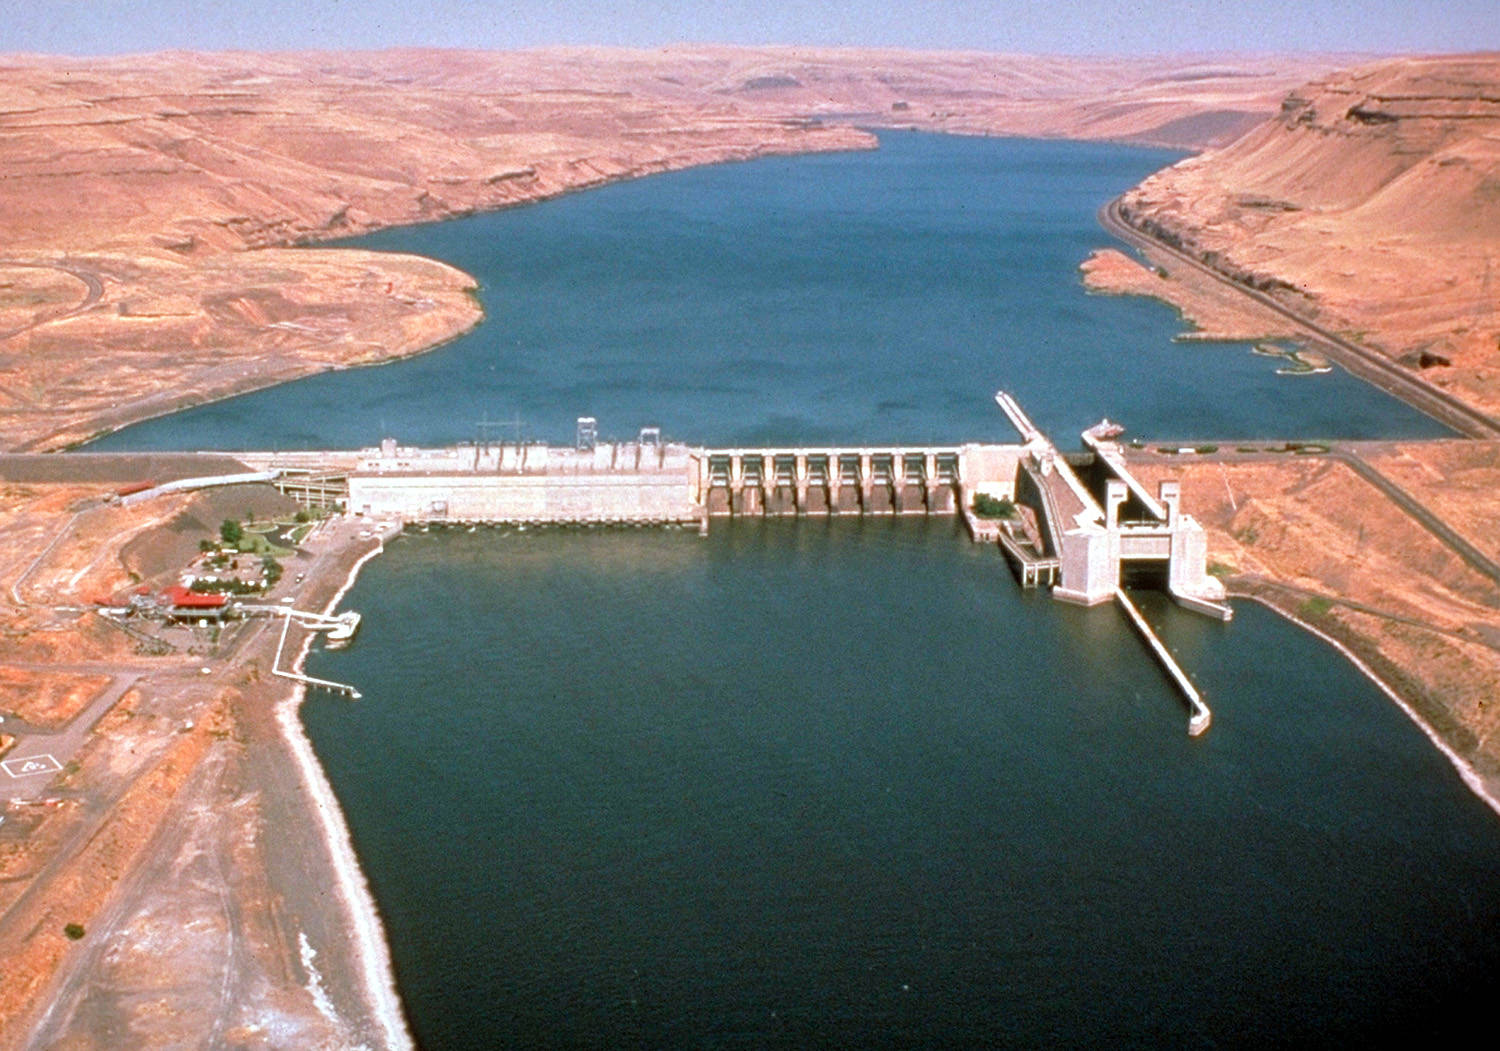 OPALCO board listens to member concerns - reconsiders resolution on Snake River dams